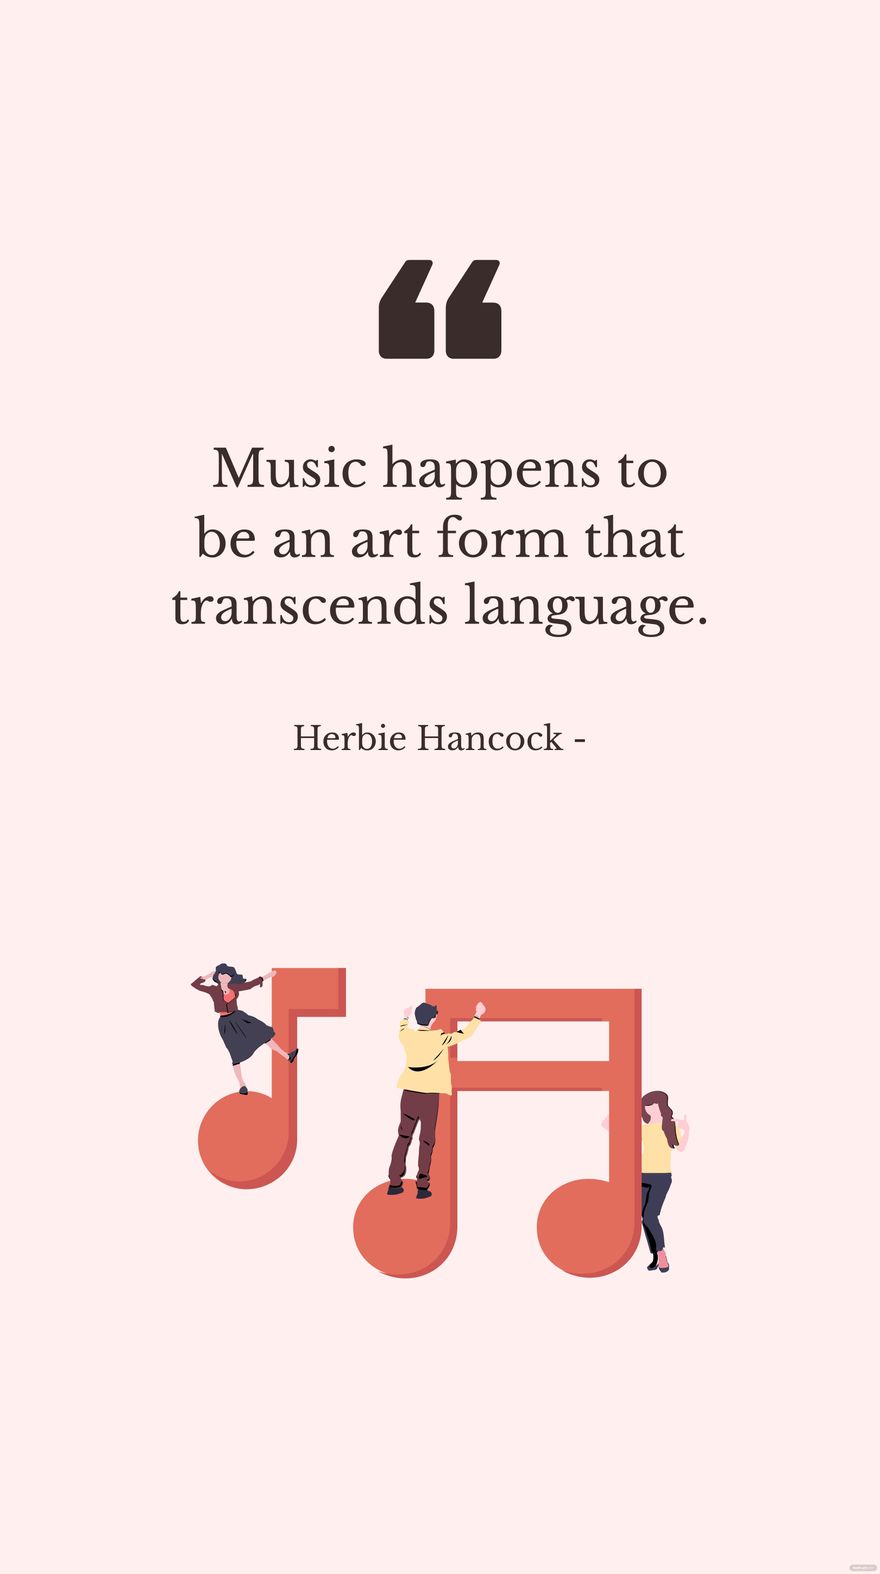 Herbie Hancock - Music happens to be an art form that transcends language. in JPG